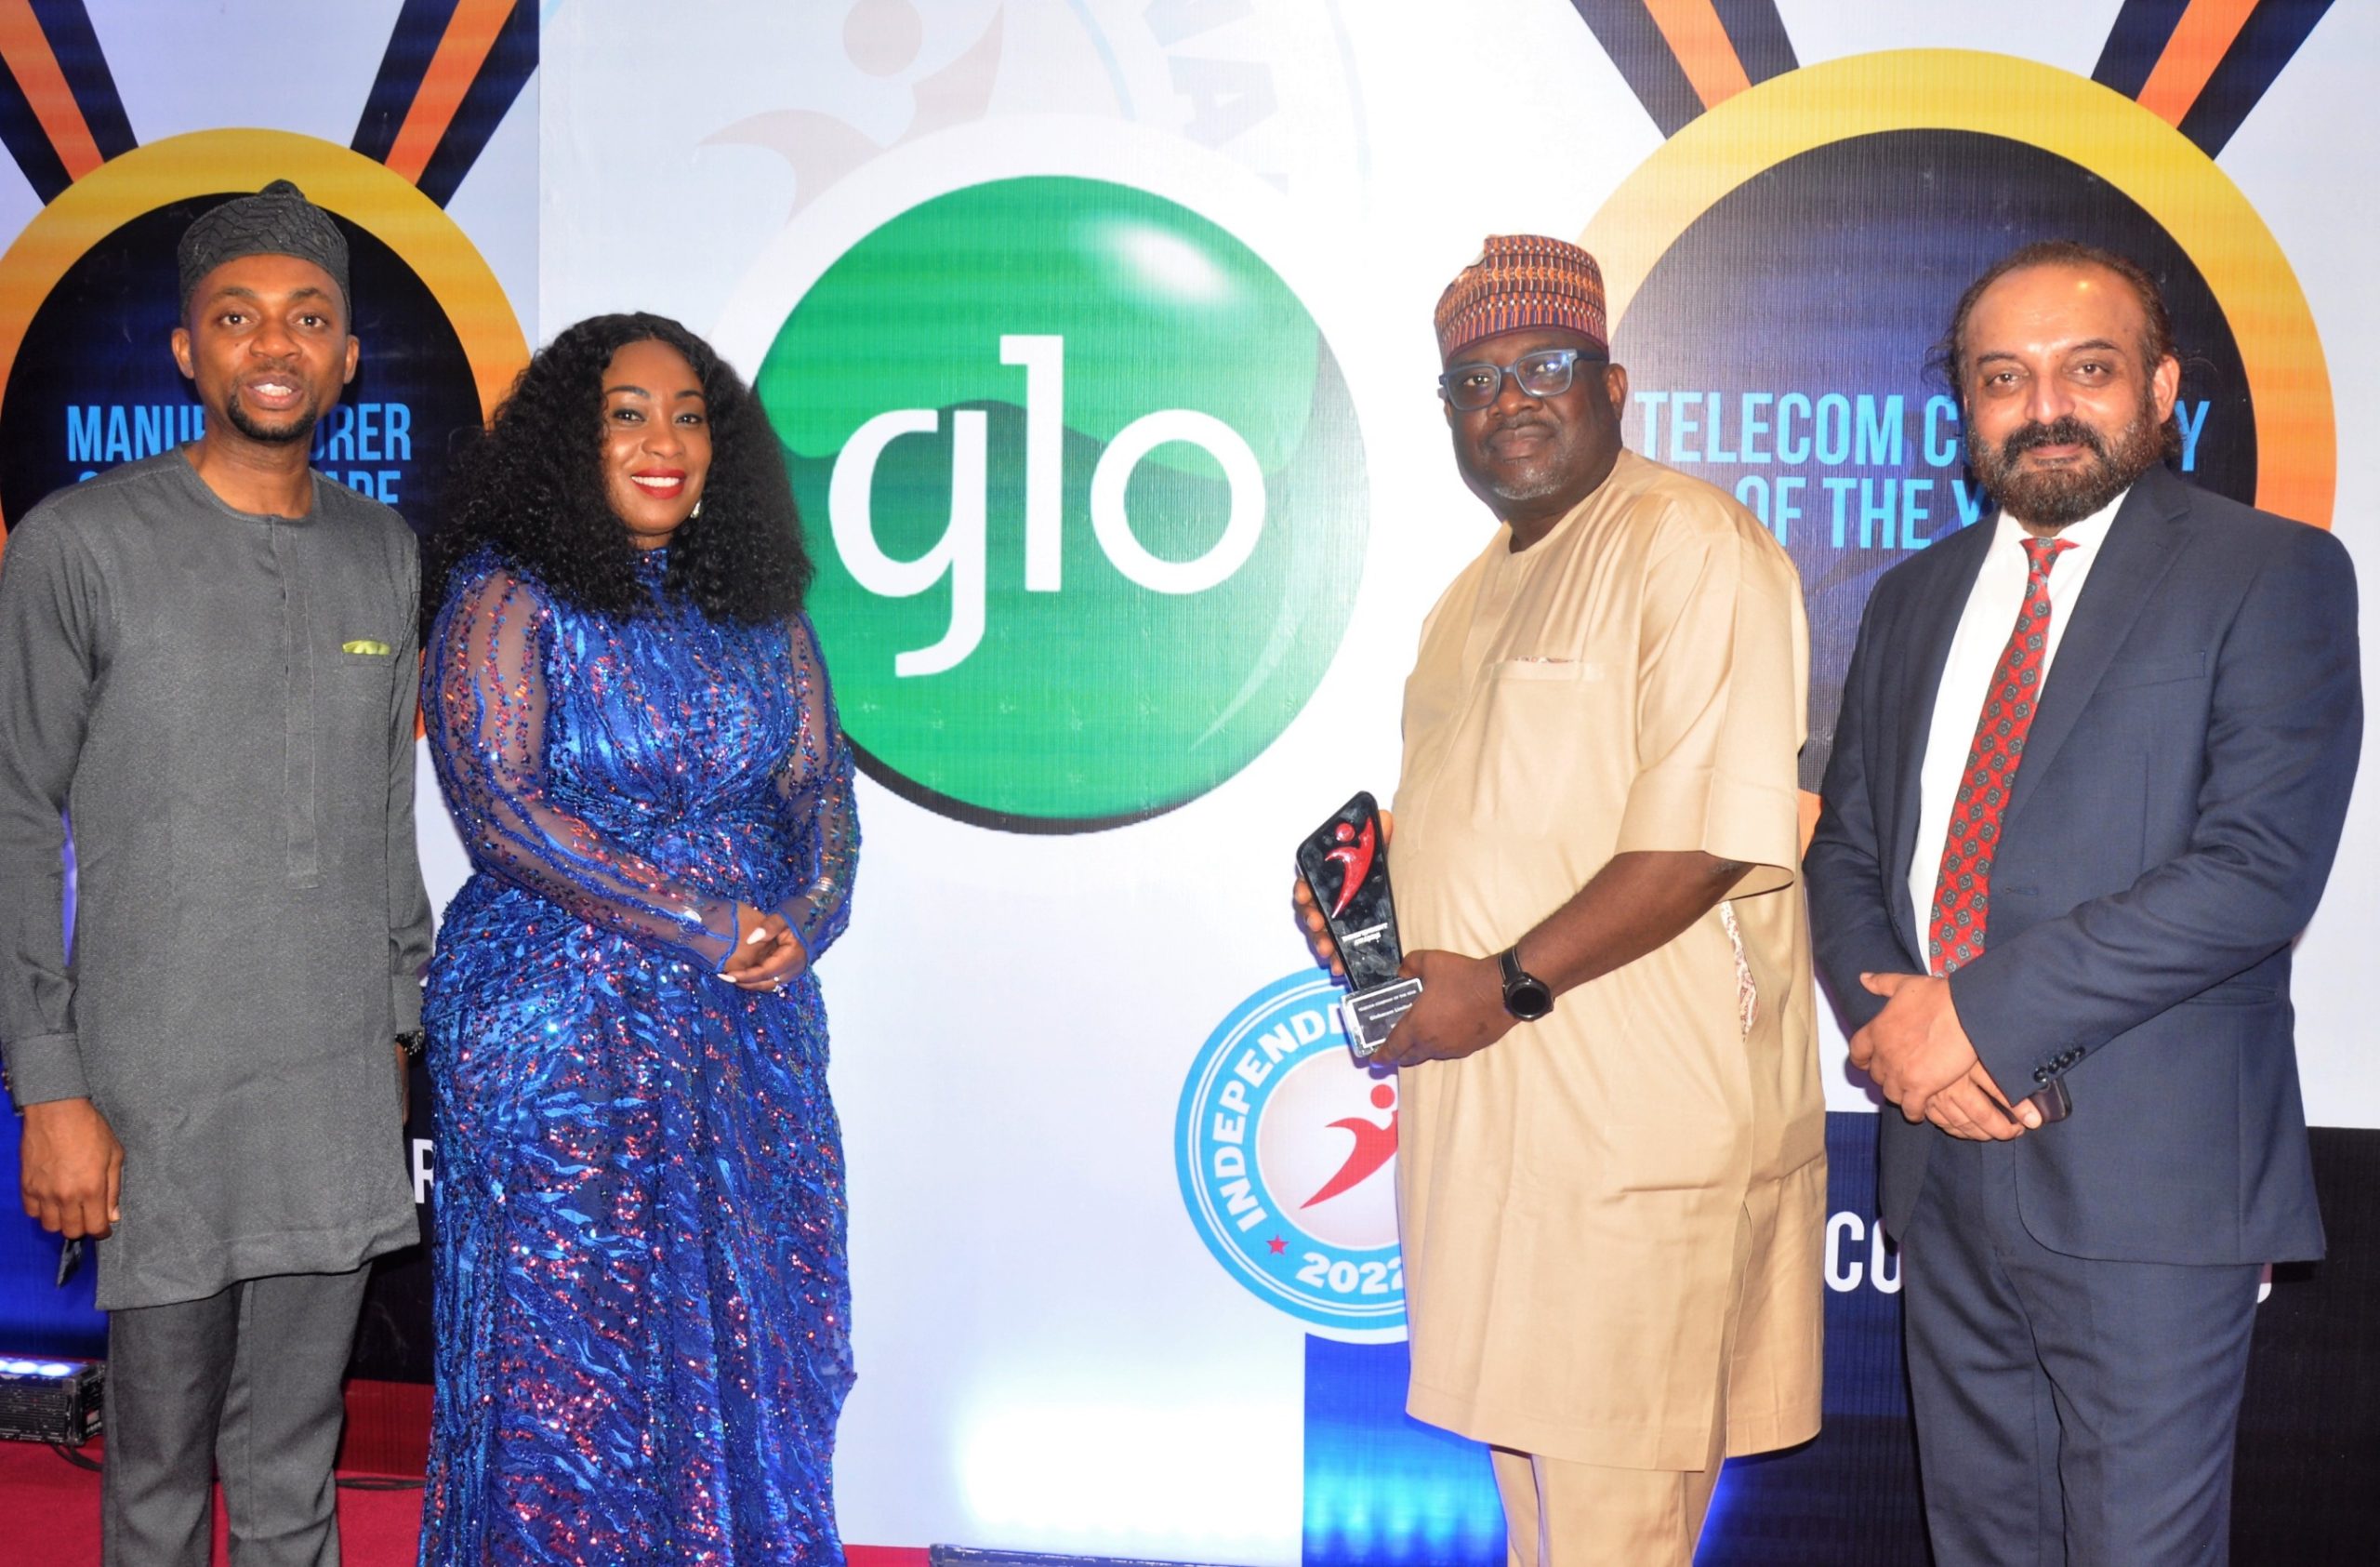 Why Glo won Telecom Company of the Year Award – Daily Independent